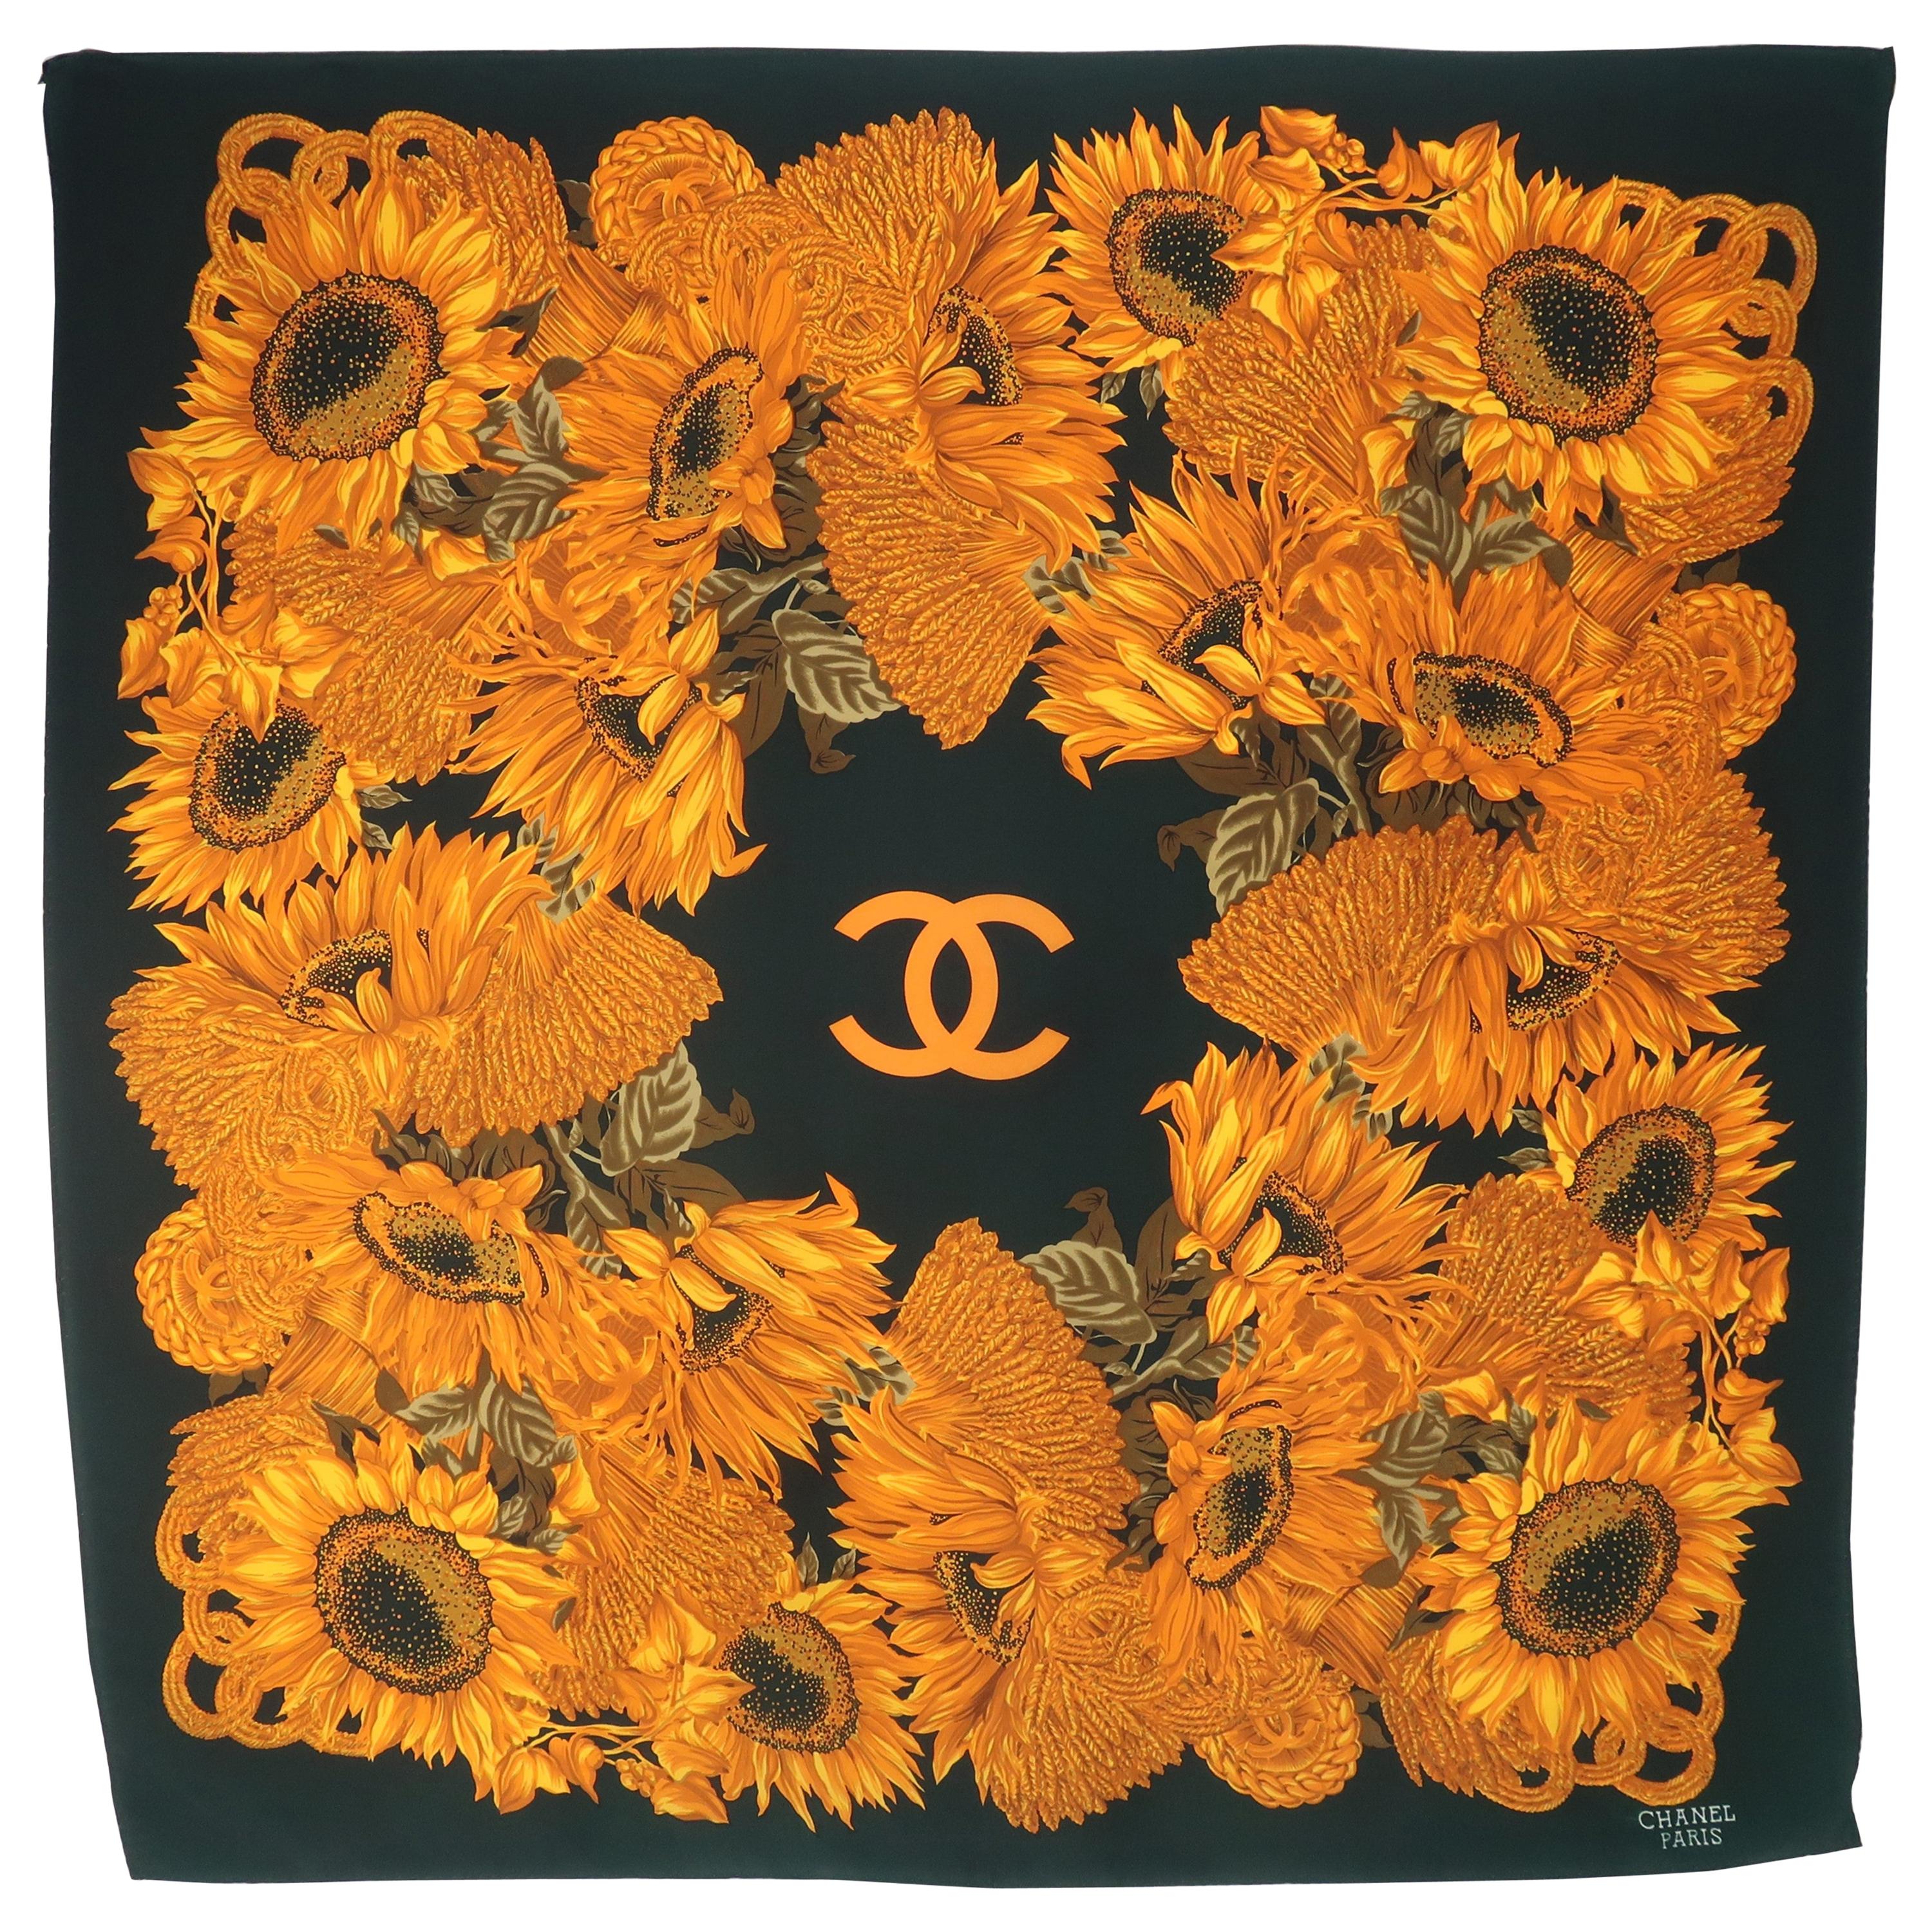 CHANEL RUE CAMBON VINTAGE SCARF green with golden chain links pattern  circa 1990s silk 86cm x 86cm